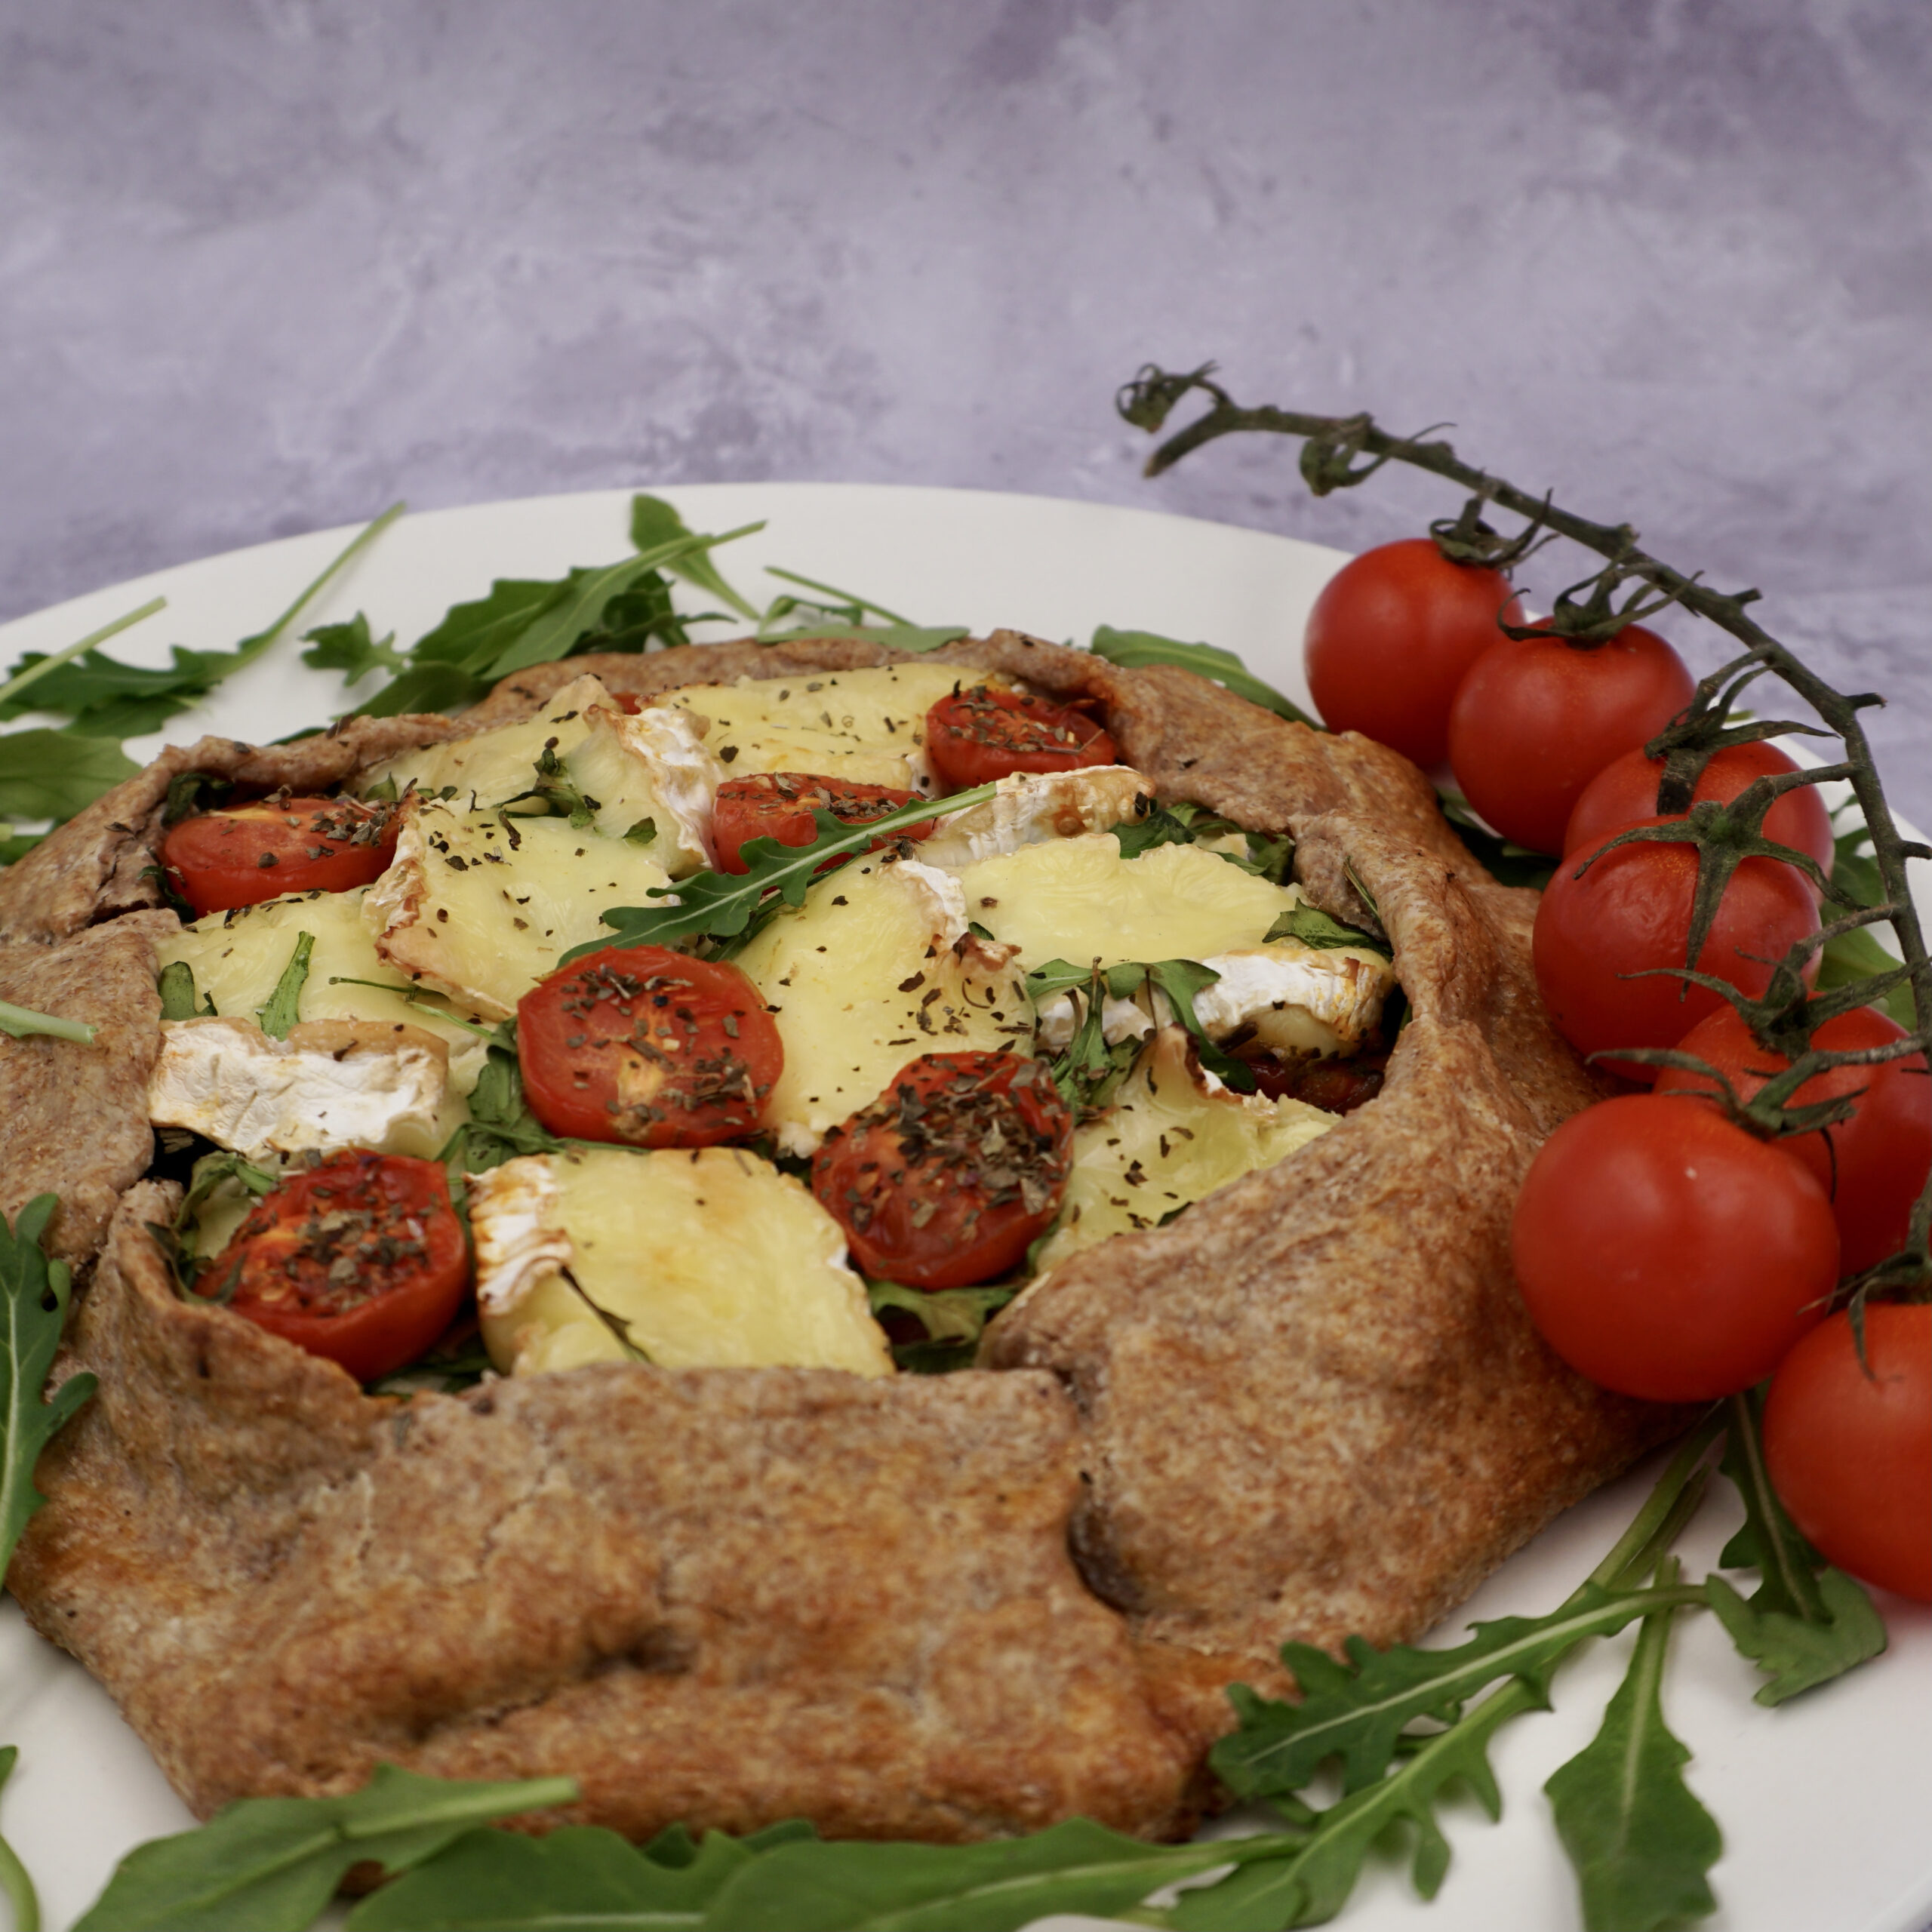 A rustic vegetarian galette on a plate with a stem of cherry tomatoes